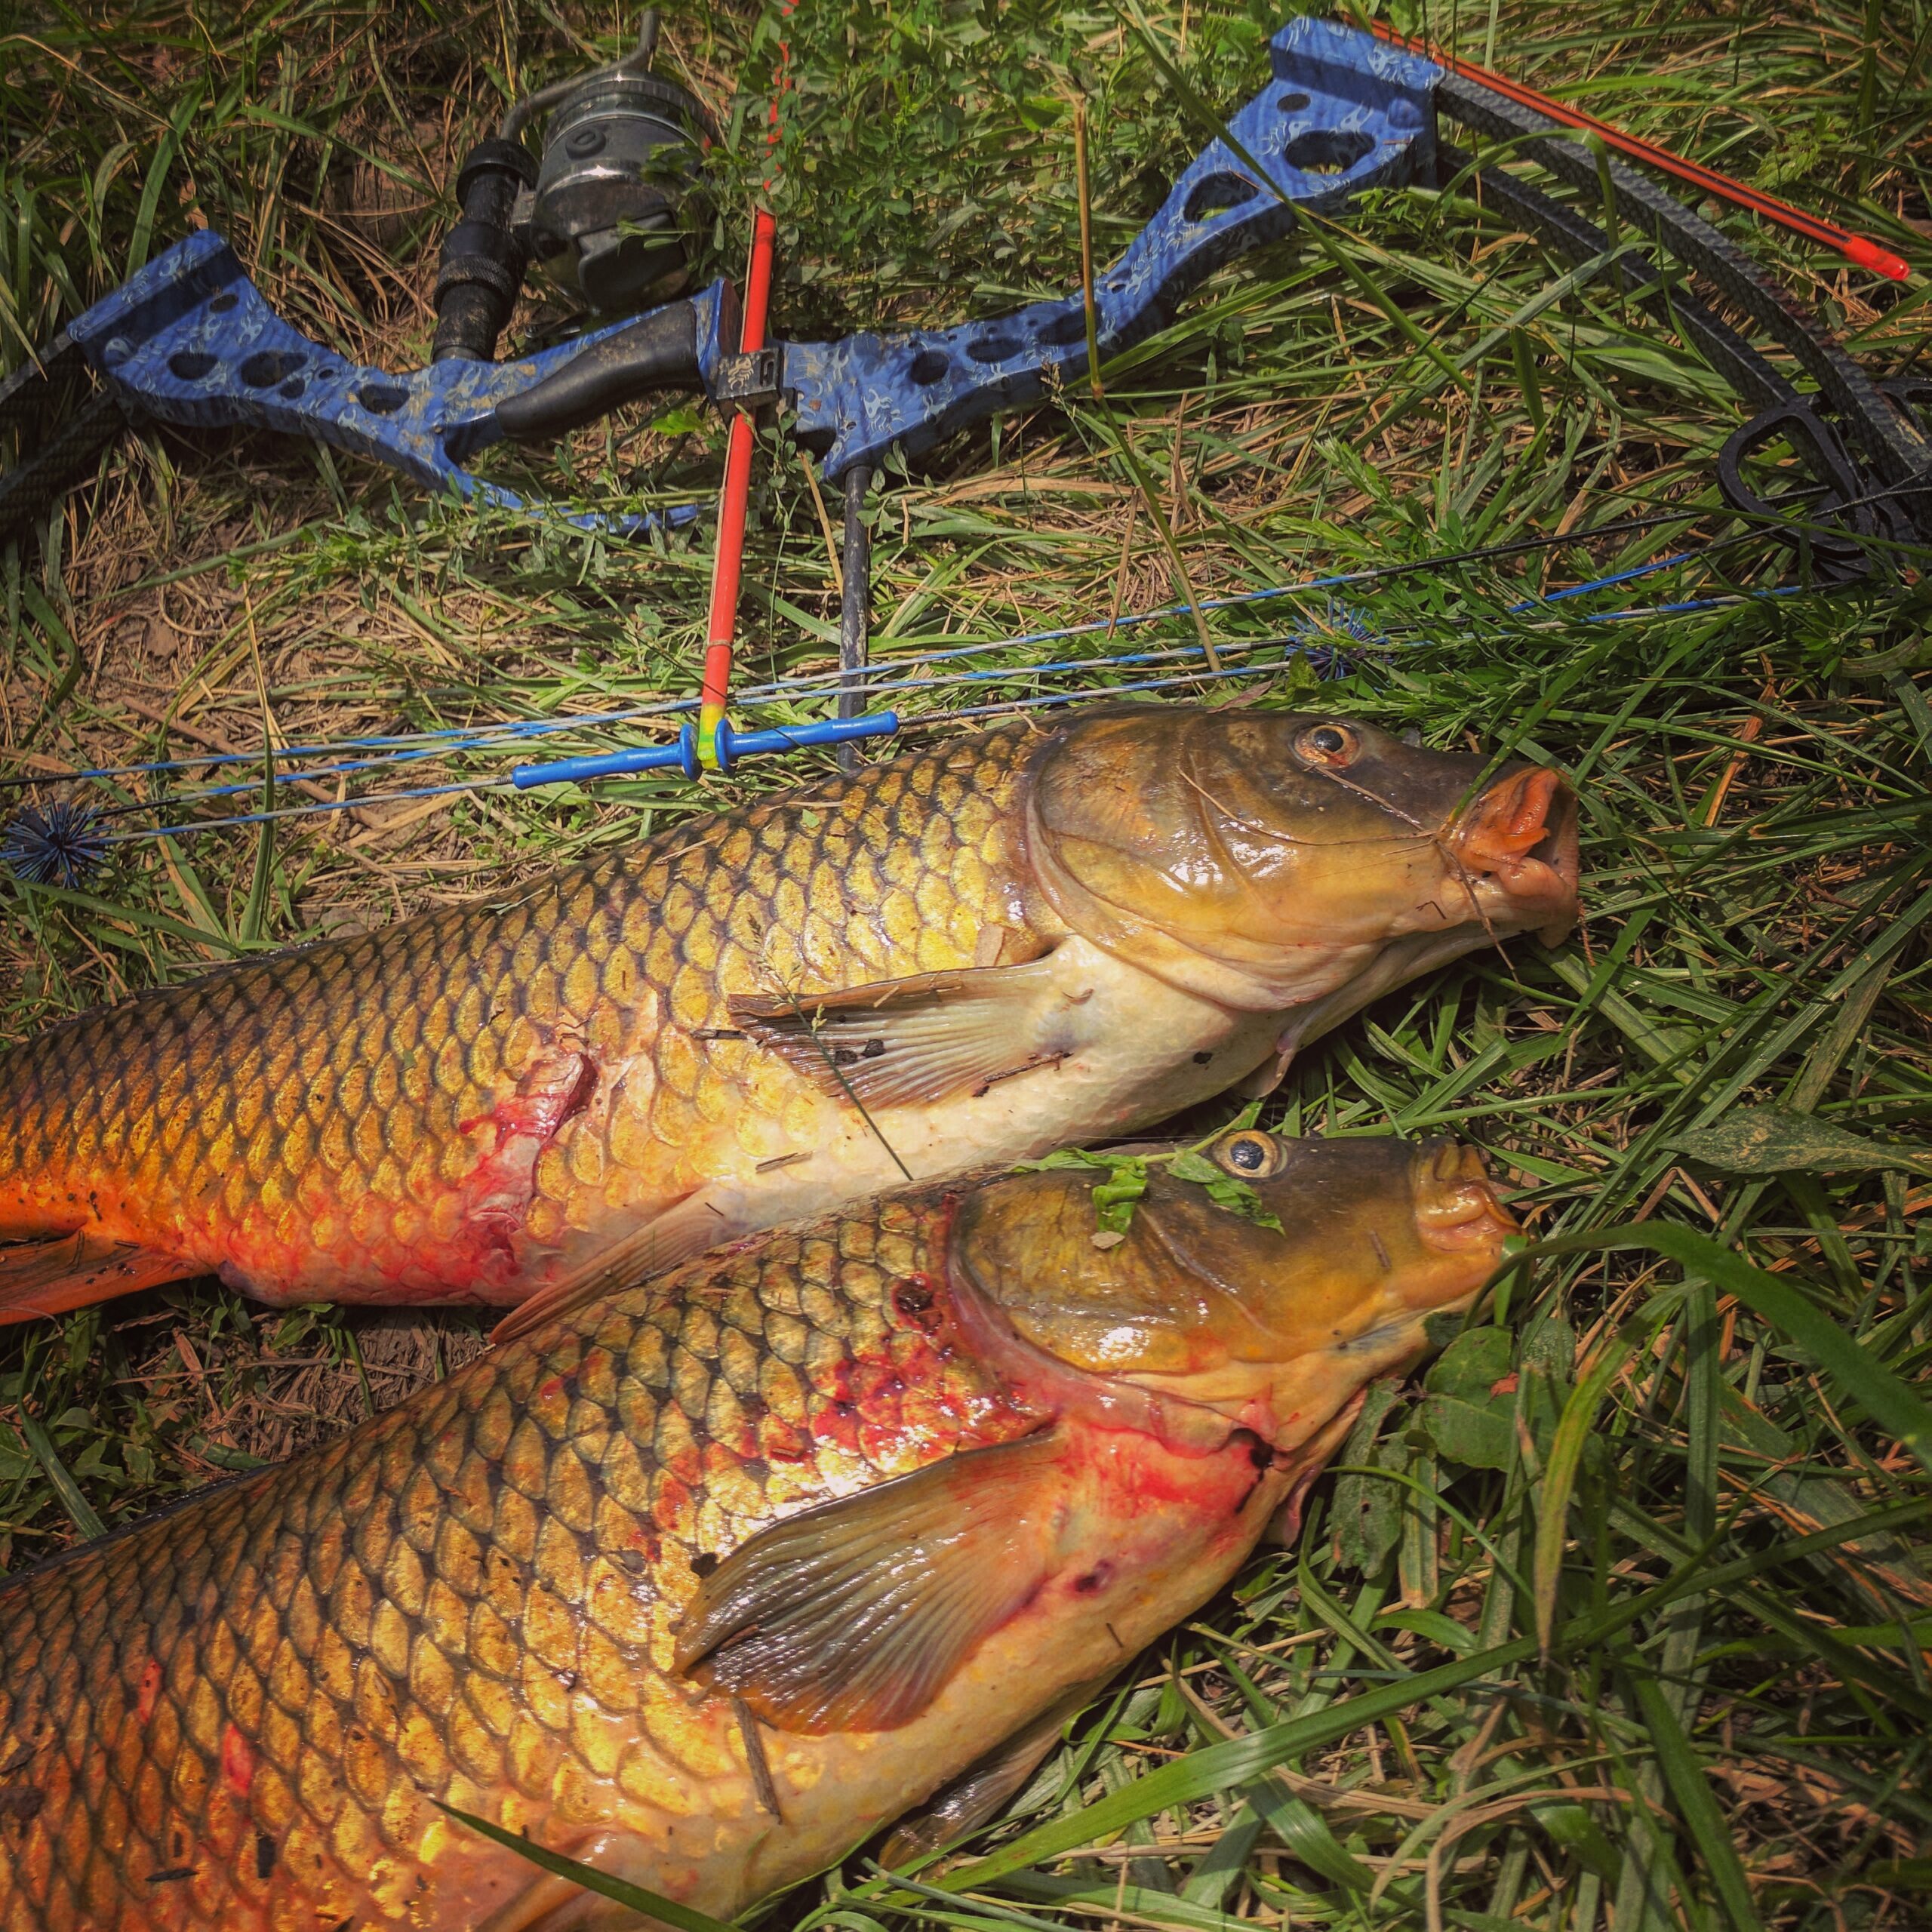 Common carp can be found in nasty/muddy waters.